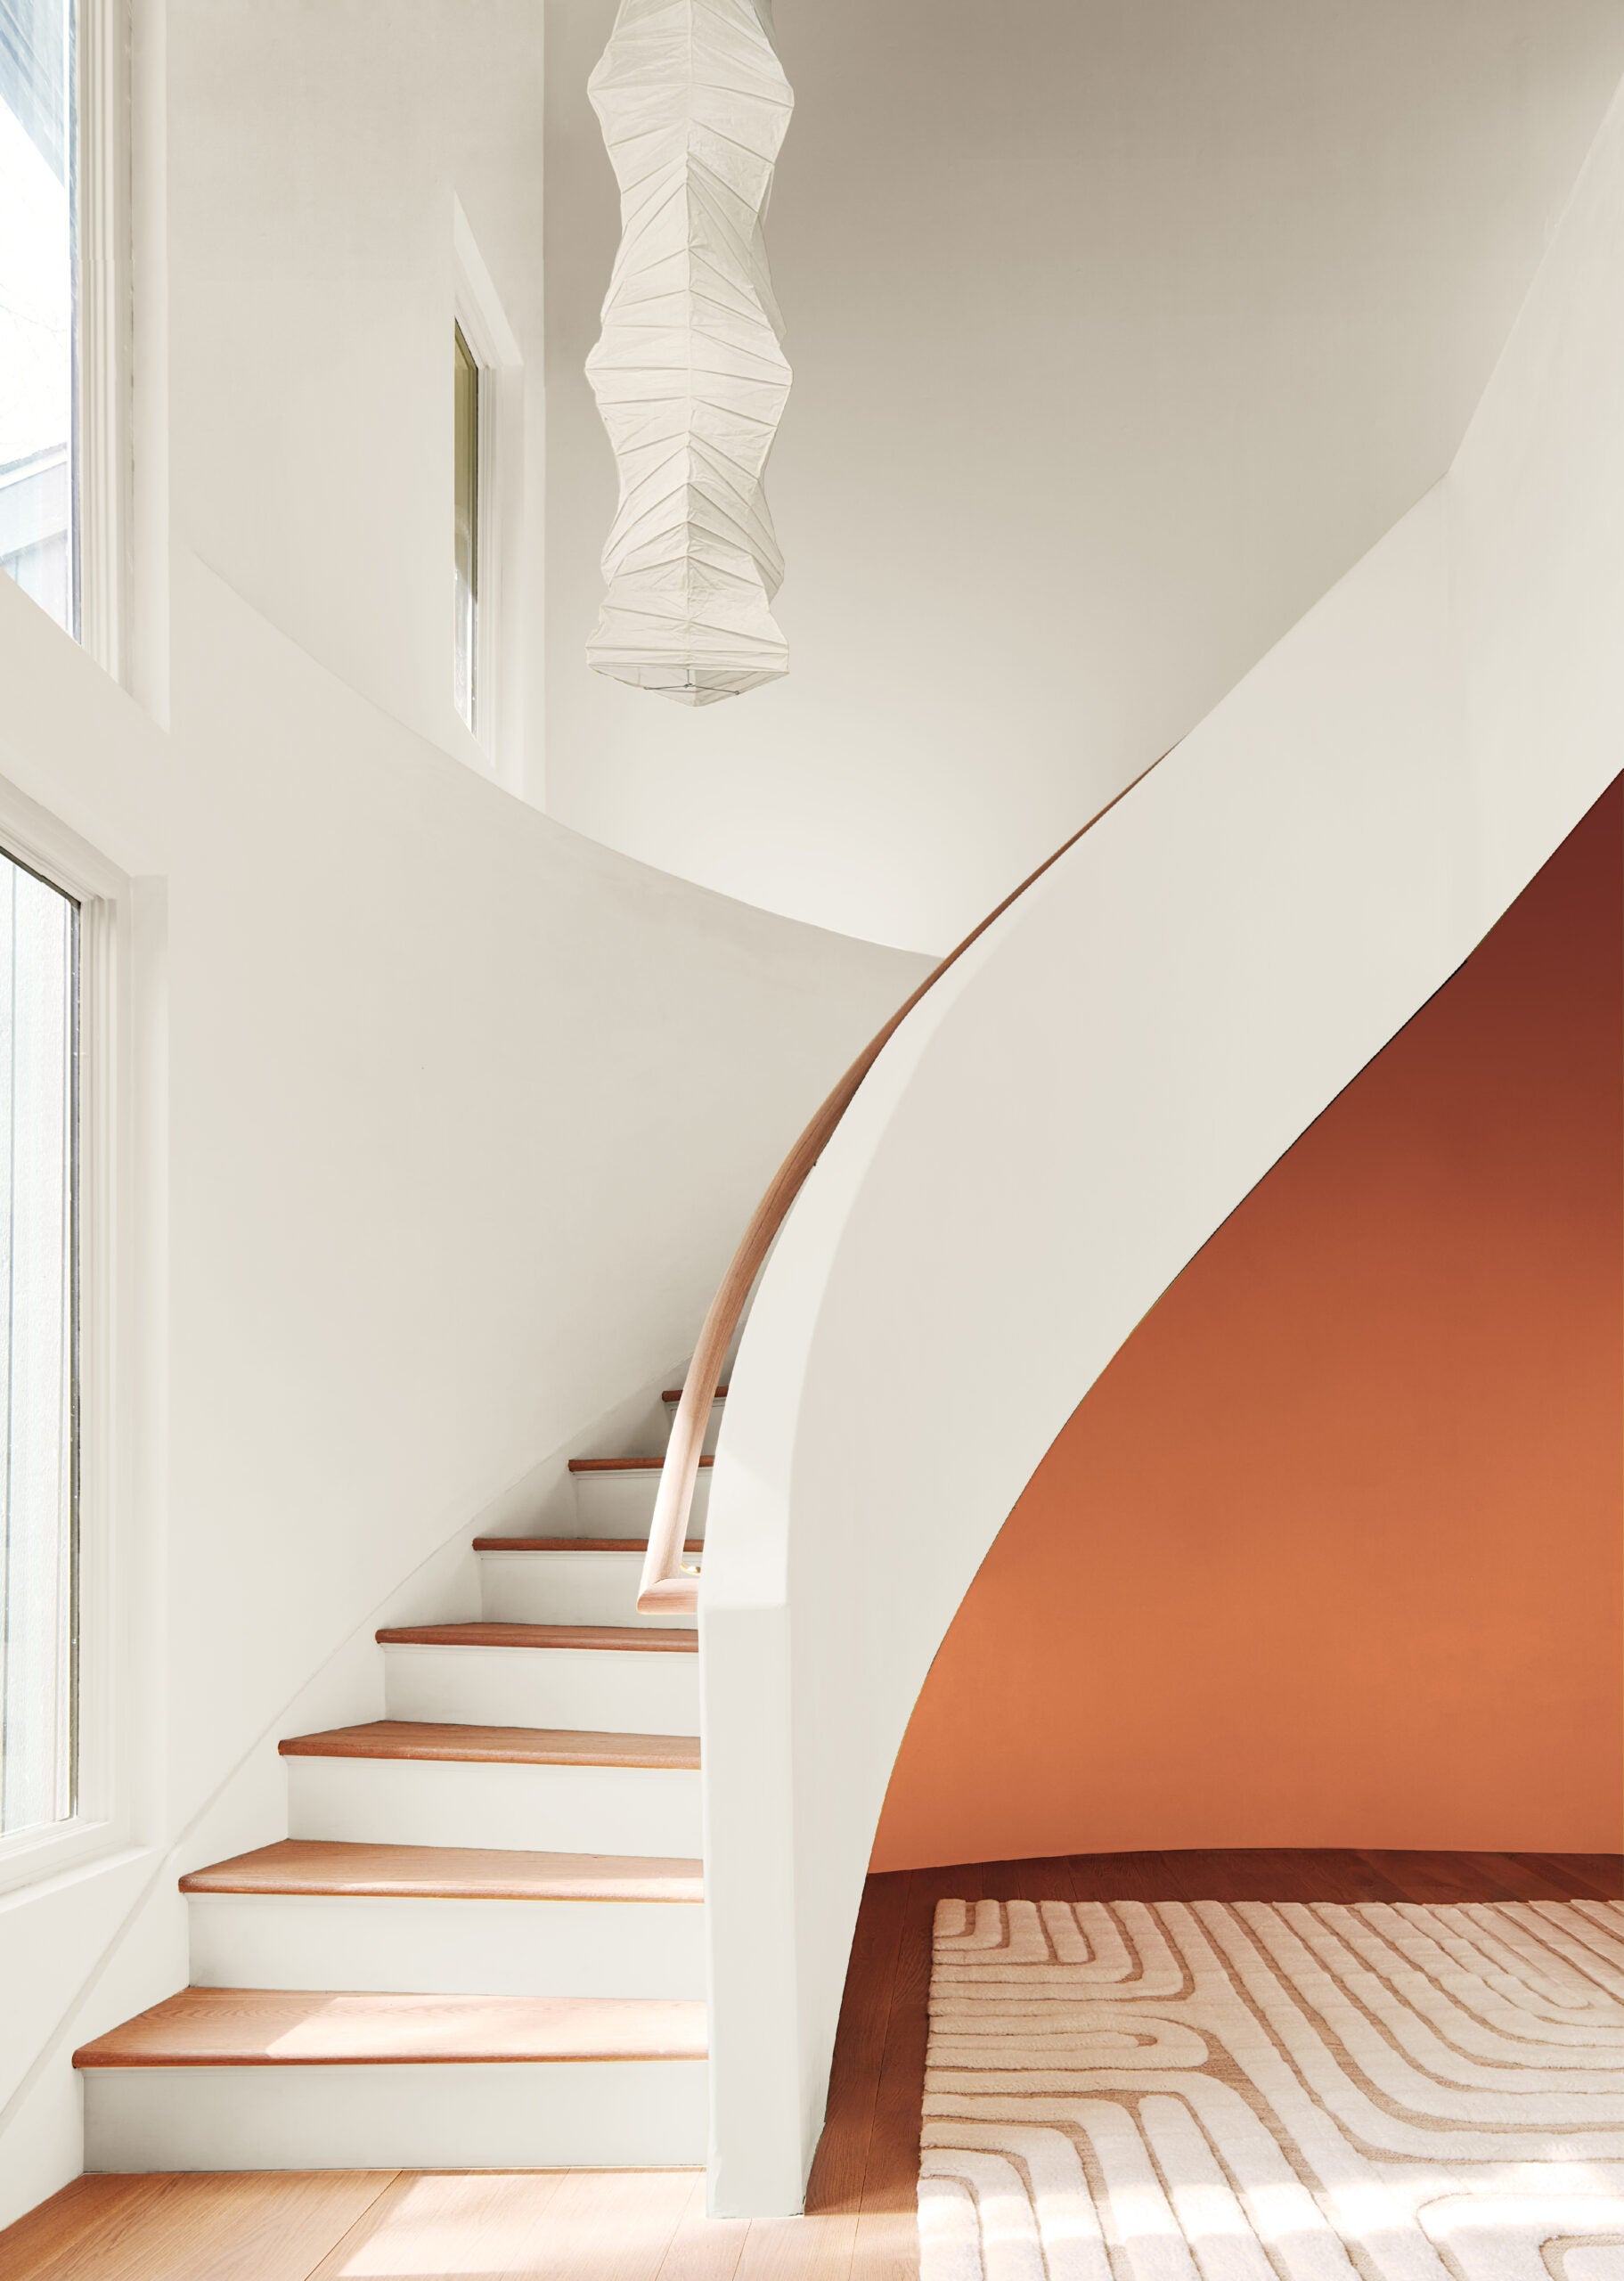 A staircase with a white back wall and a topaz orange accent wall behind it.